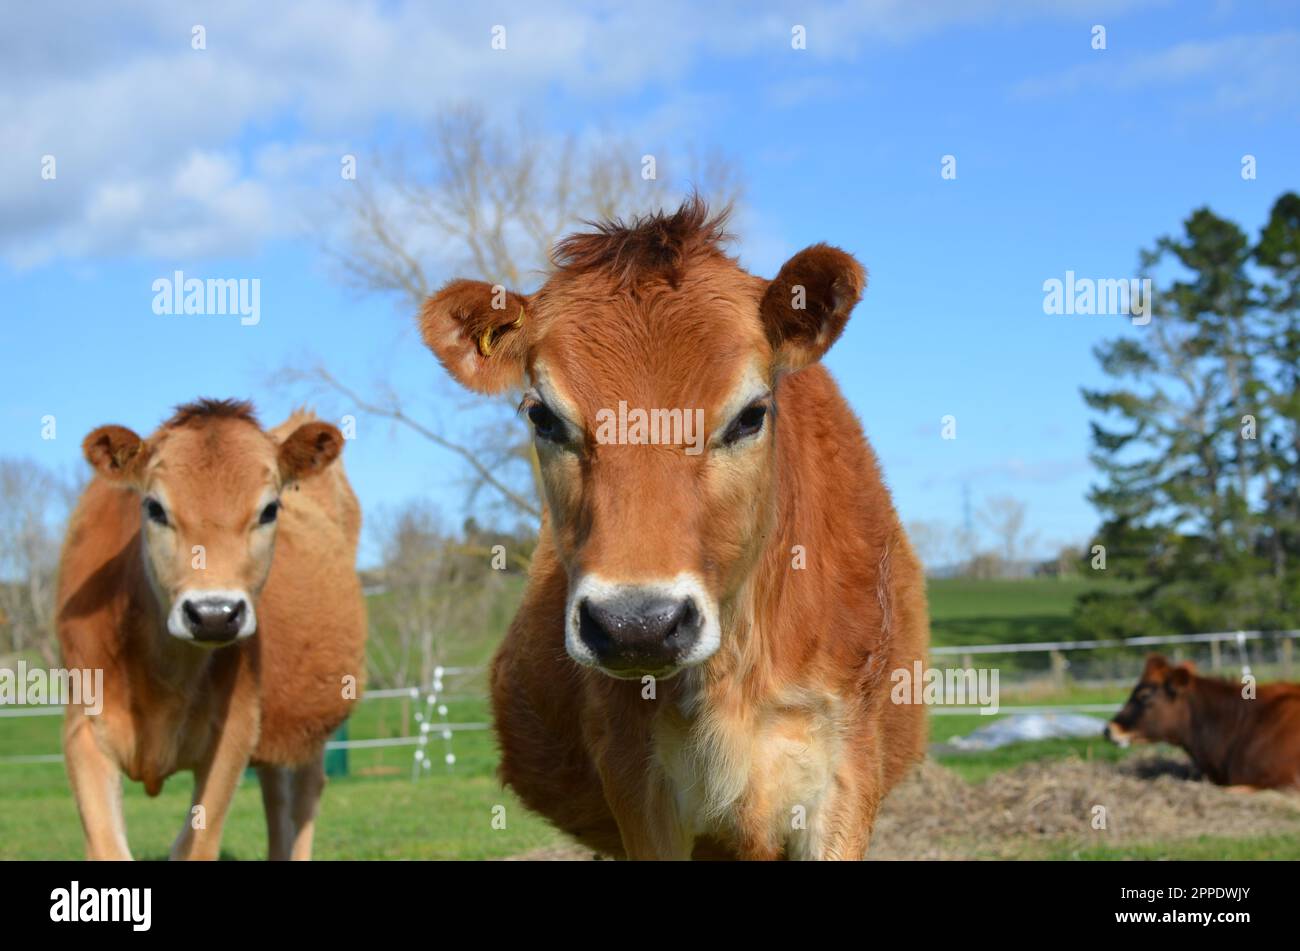 Purebred Jersey Heifer Cows And Calves. Stock Photo